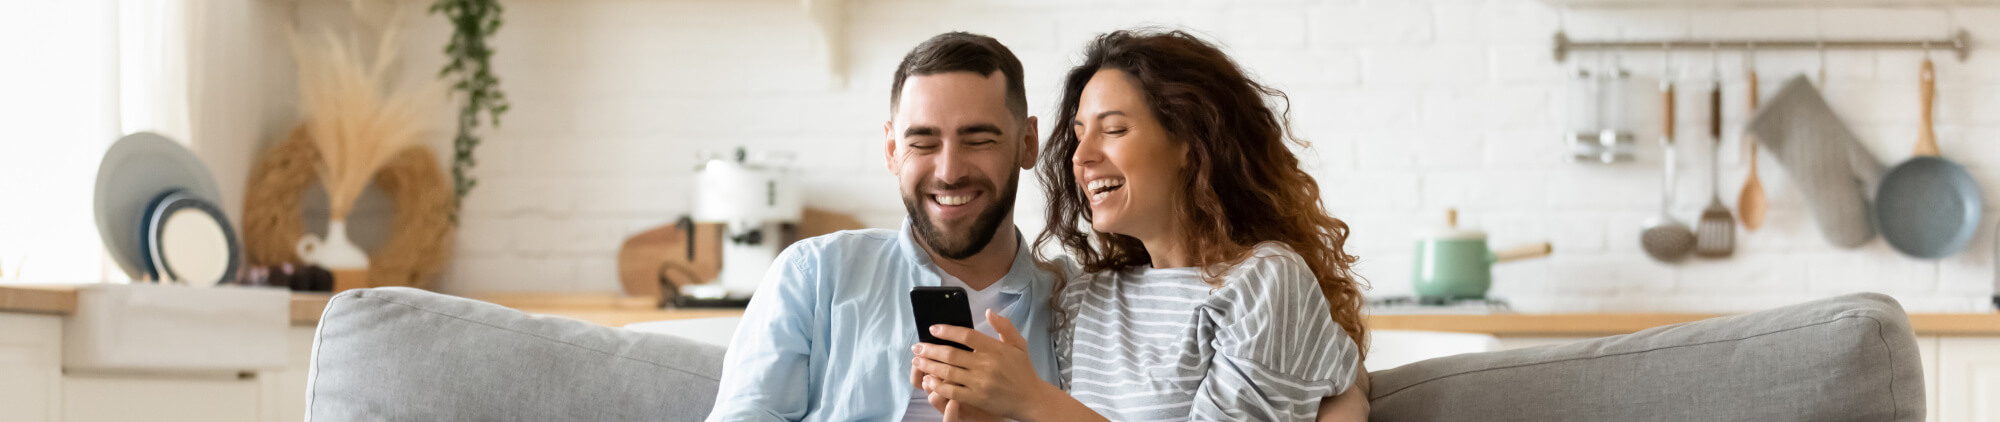 Happy young woman and man hugging, using smartphone together, sitting on cozy couch at home